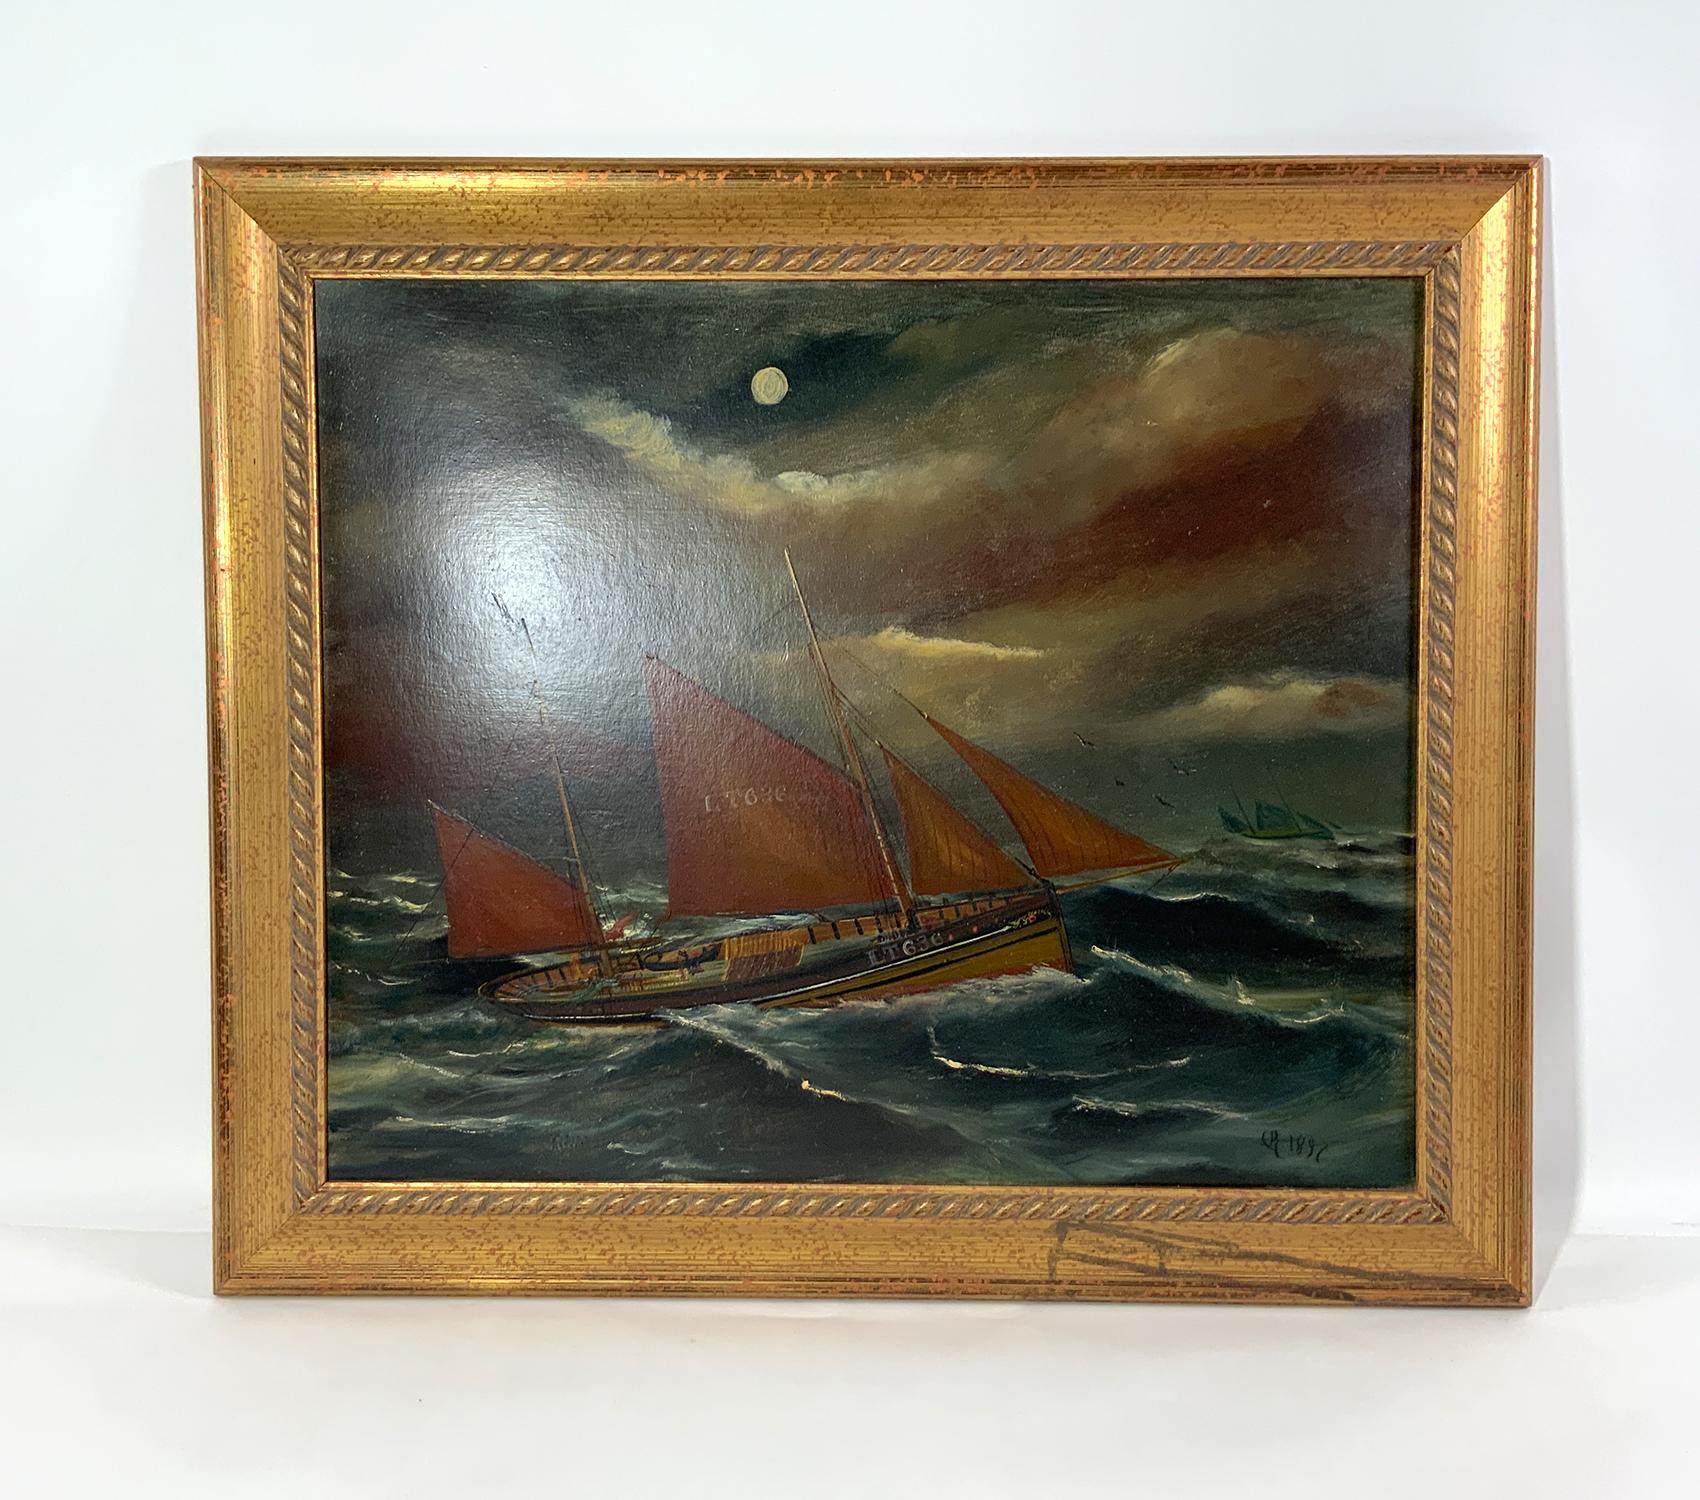 1891 Oil on board of an English fishing trawler sailing through rough seas. Sail of trawler is marked LT636 is under full sail in a full moon with a second similar vessel in the distance. Signed C.B. and dated 1897 lower right. Remounted and